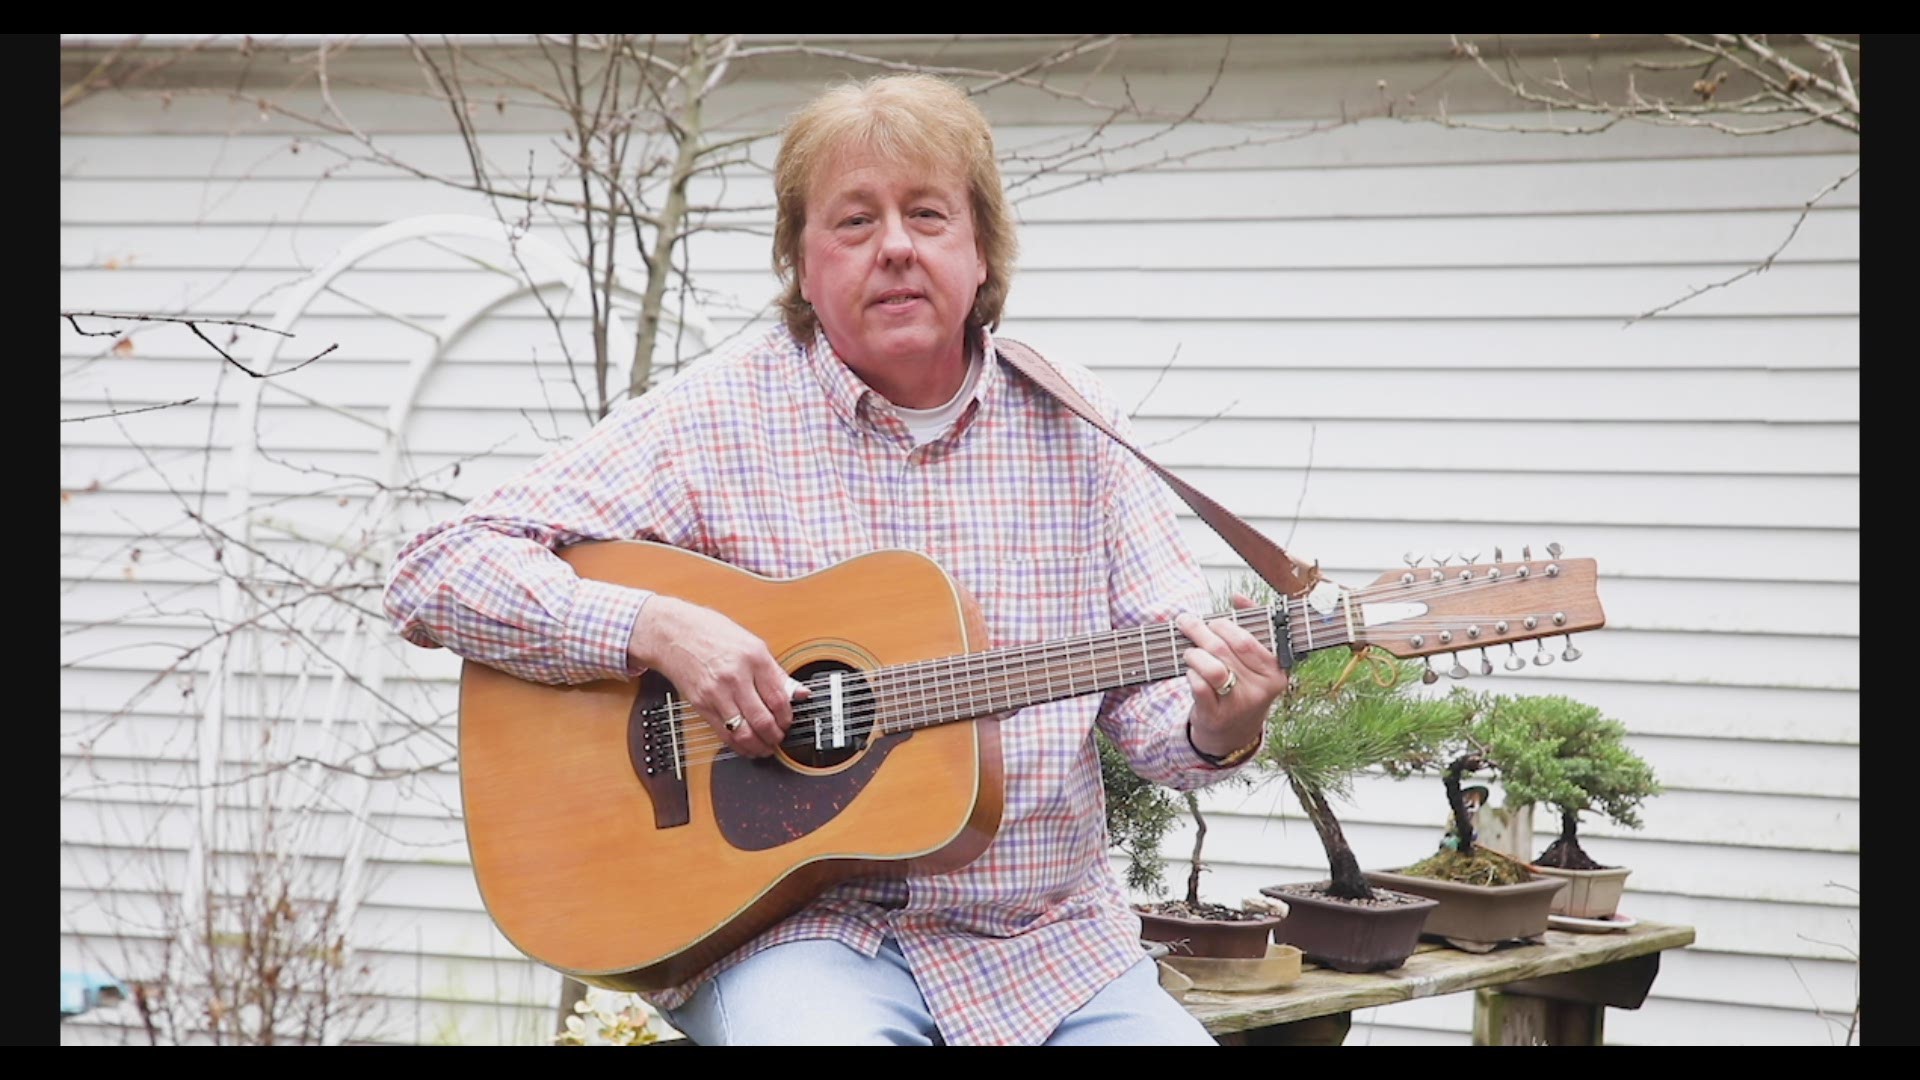 A message of hope from singer-songwriter Bob Rowe.